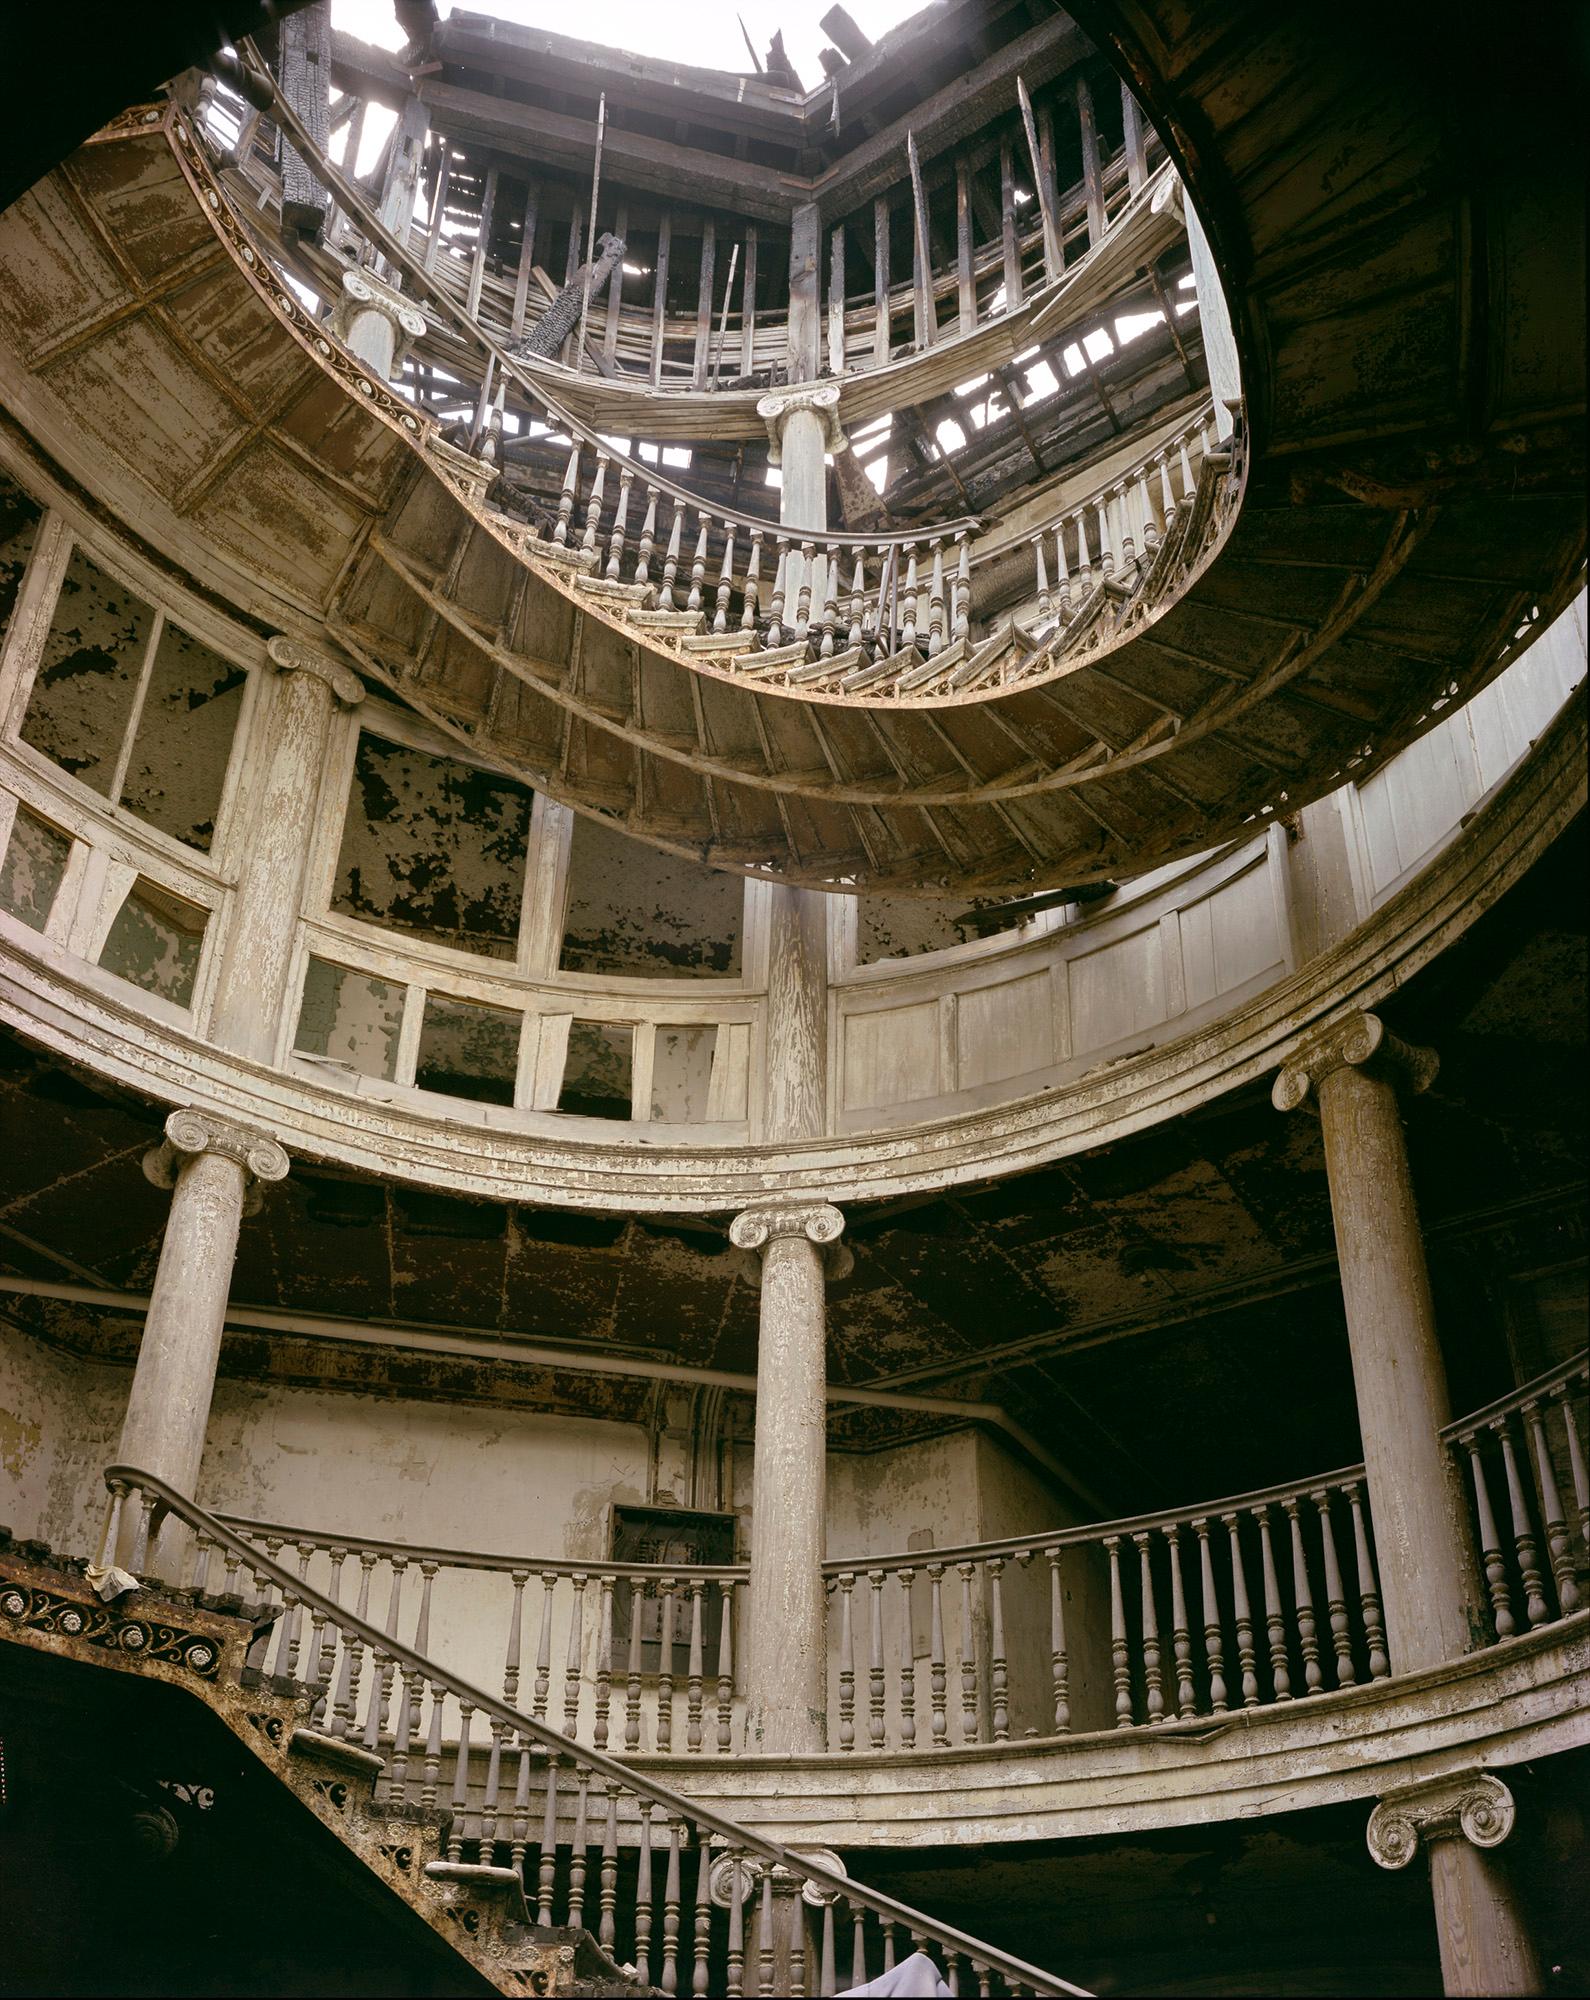 Archival Pigment Print

Insane Asylum on Roosevelt Island, NYC

All available sizes & editions for each size of this photograph:
40" x 30” - Edition of 5 + 2 Artist Proofs
50" X 40"- Edition of 5 + 2 Artist Proofs
60" X 50"-  Edition of 5 + 2 Artist